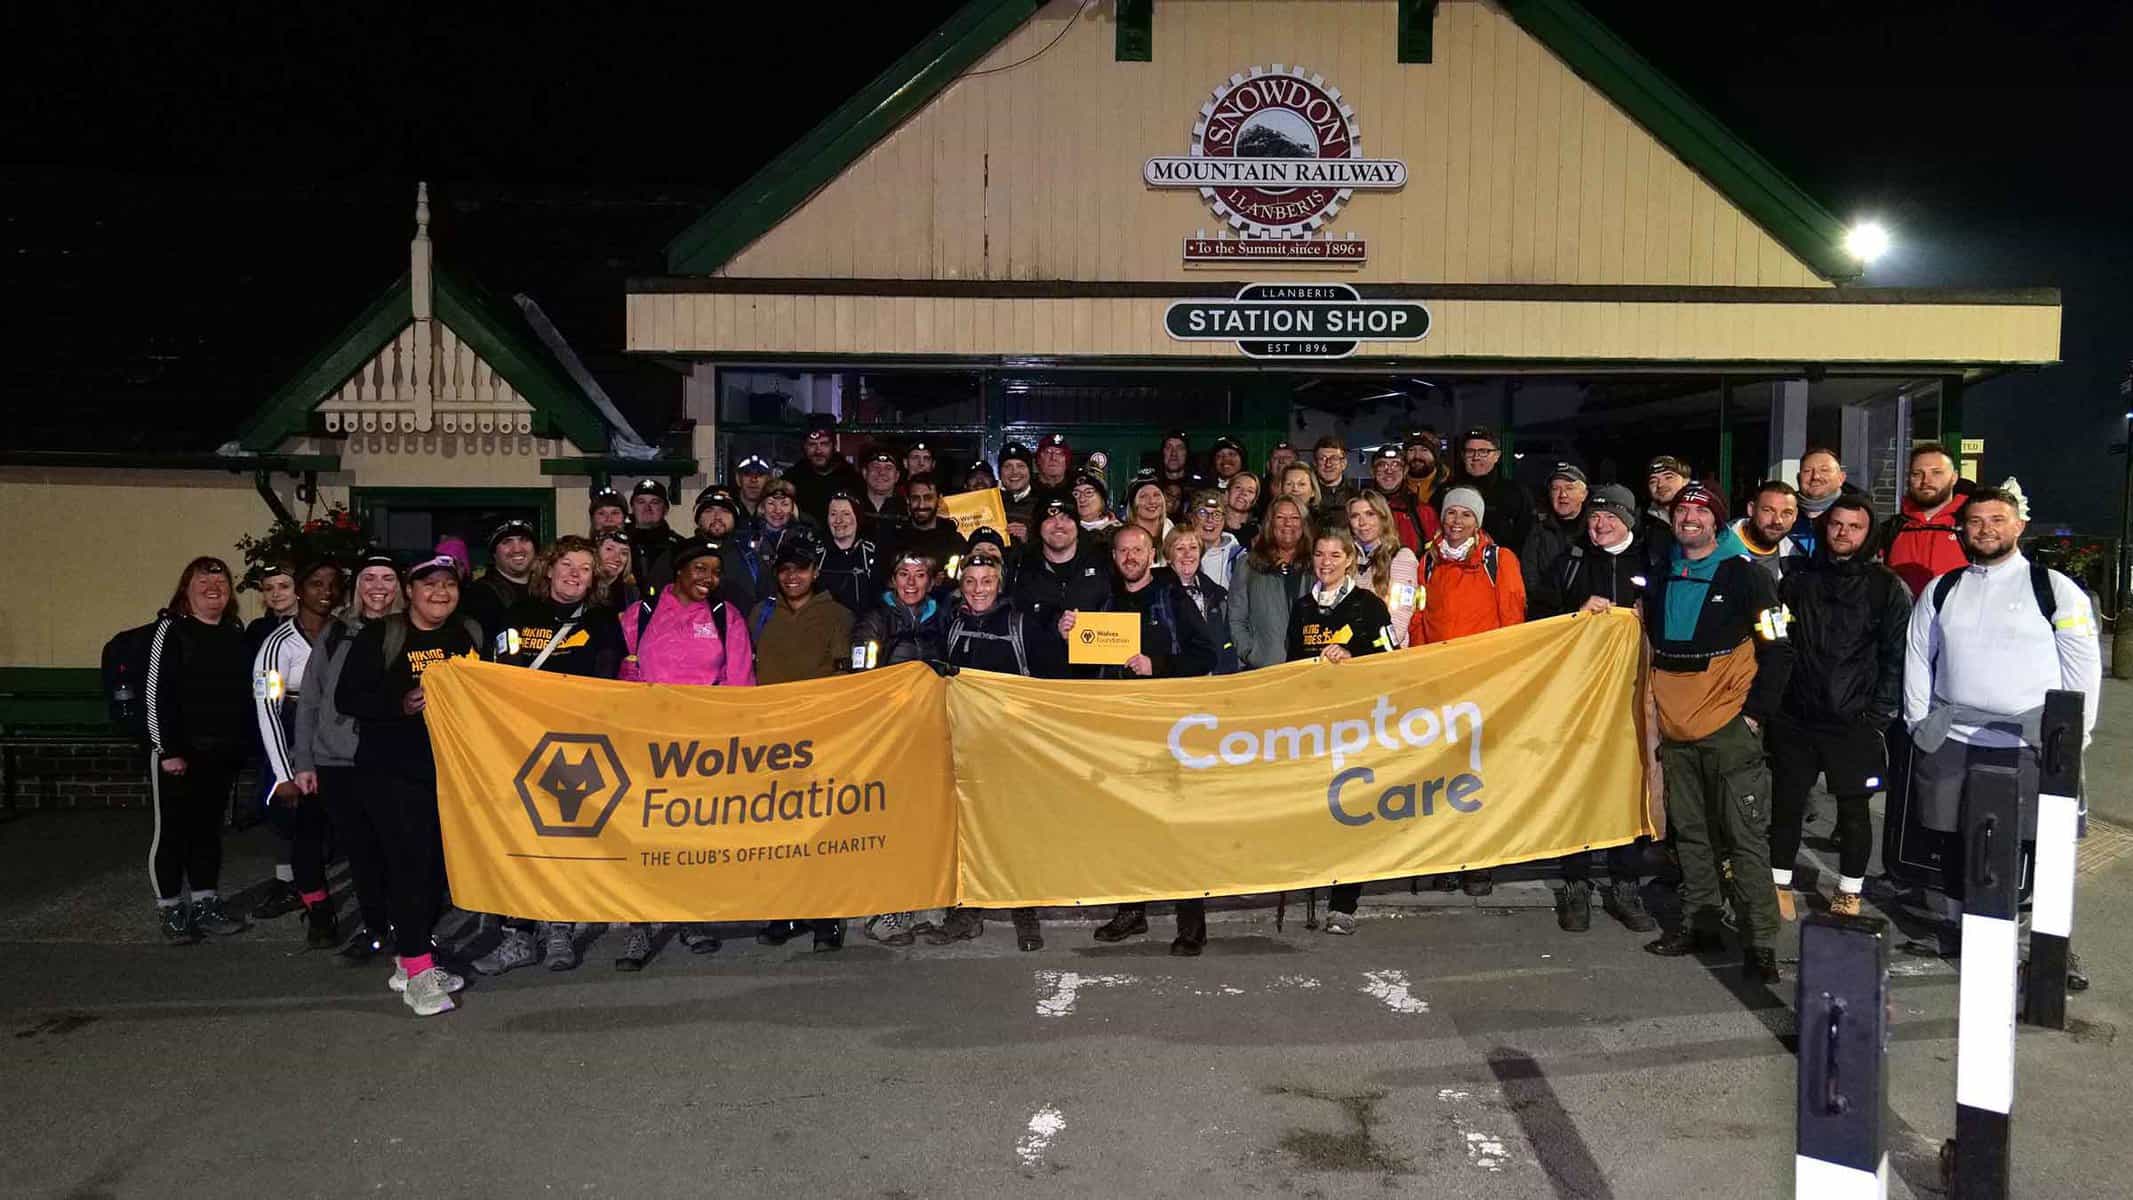 Hiking Heroes raise over £20,000 for Foundation and Compton Care Image